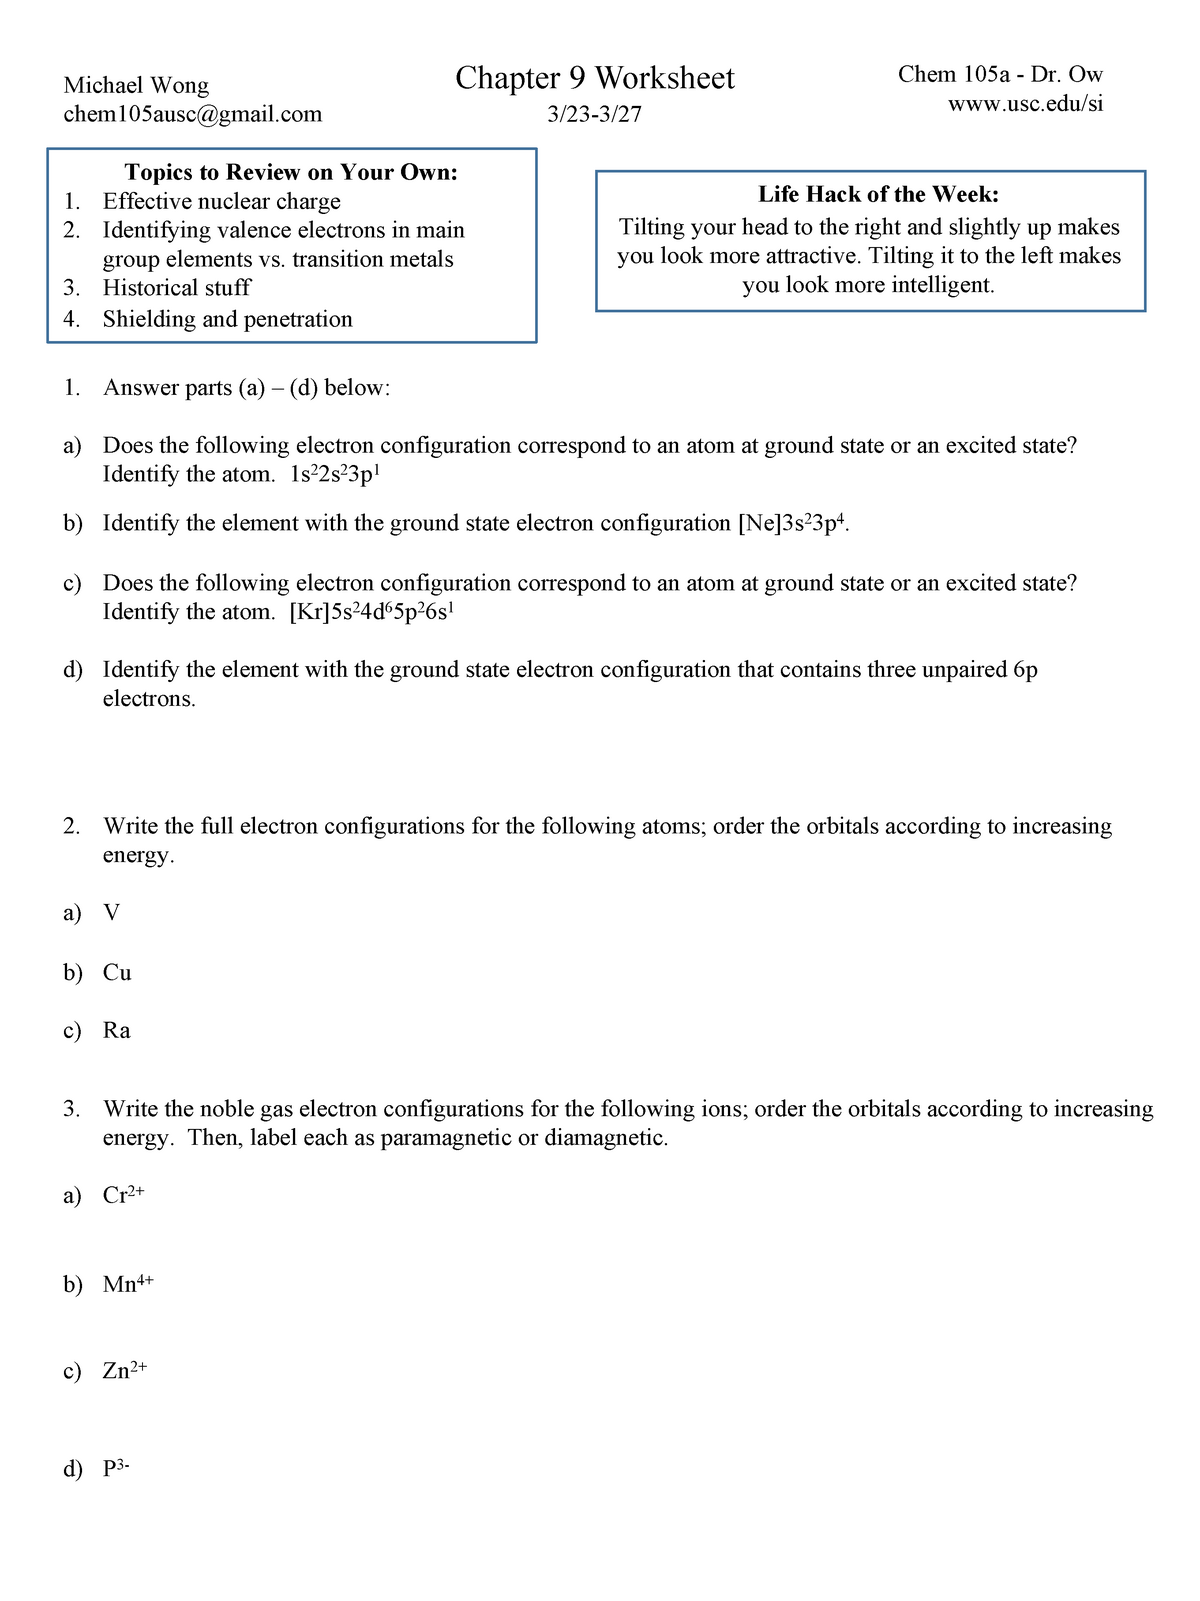 Chem 105a SI Worksheet #8 (ow) Michael Wong chem105ausc gmail Chapter